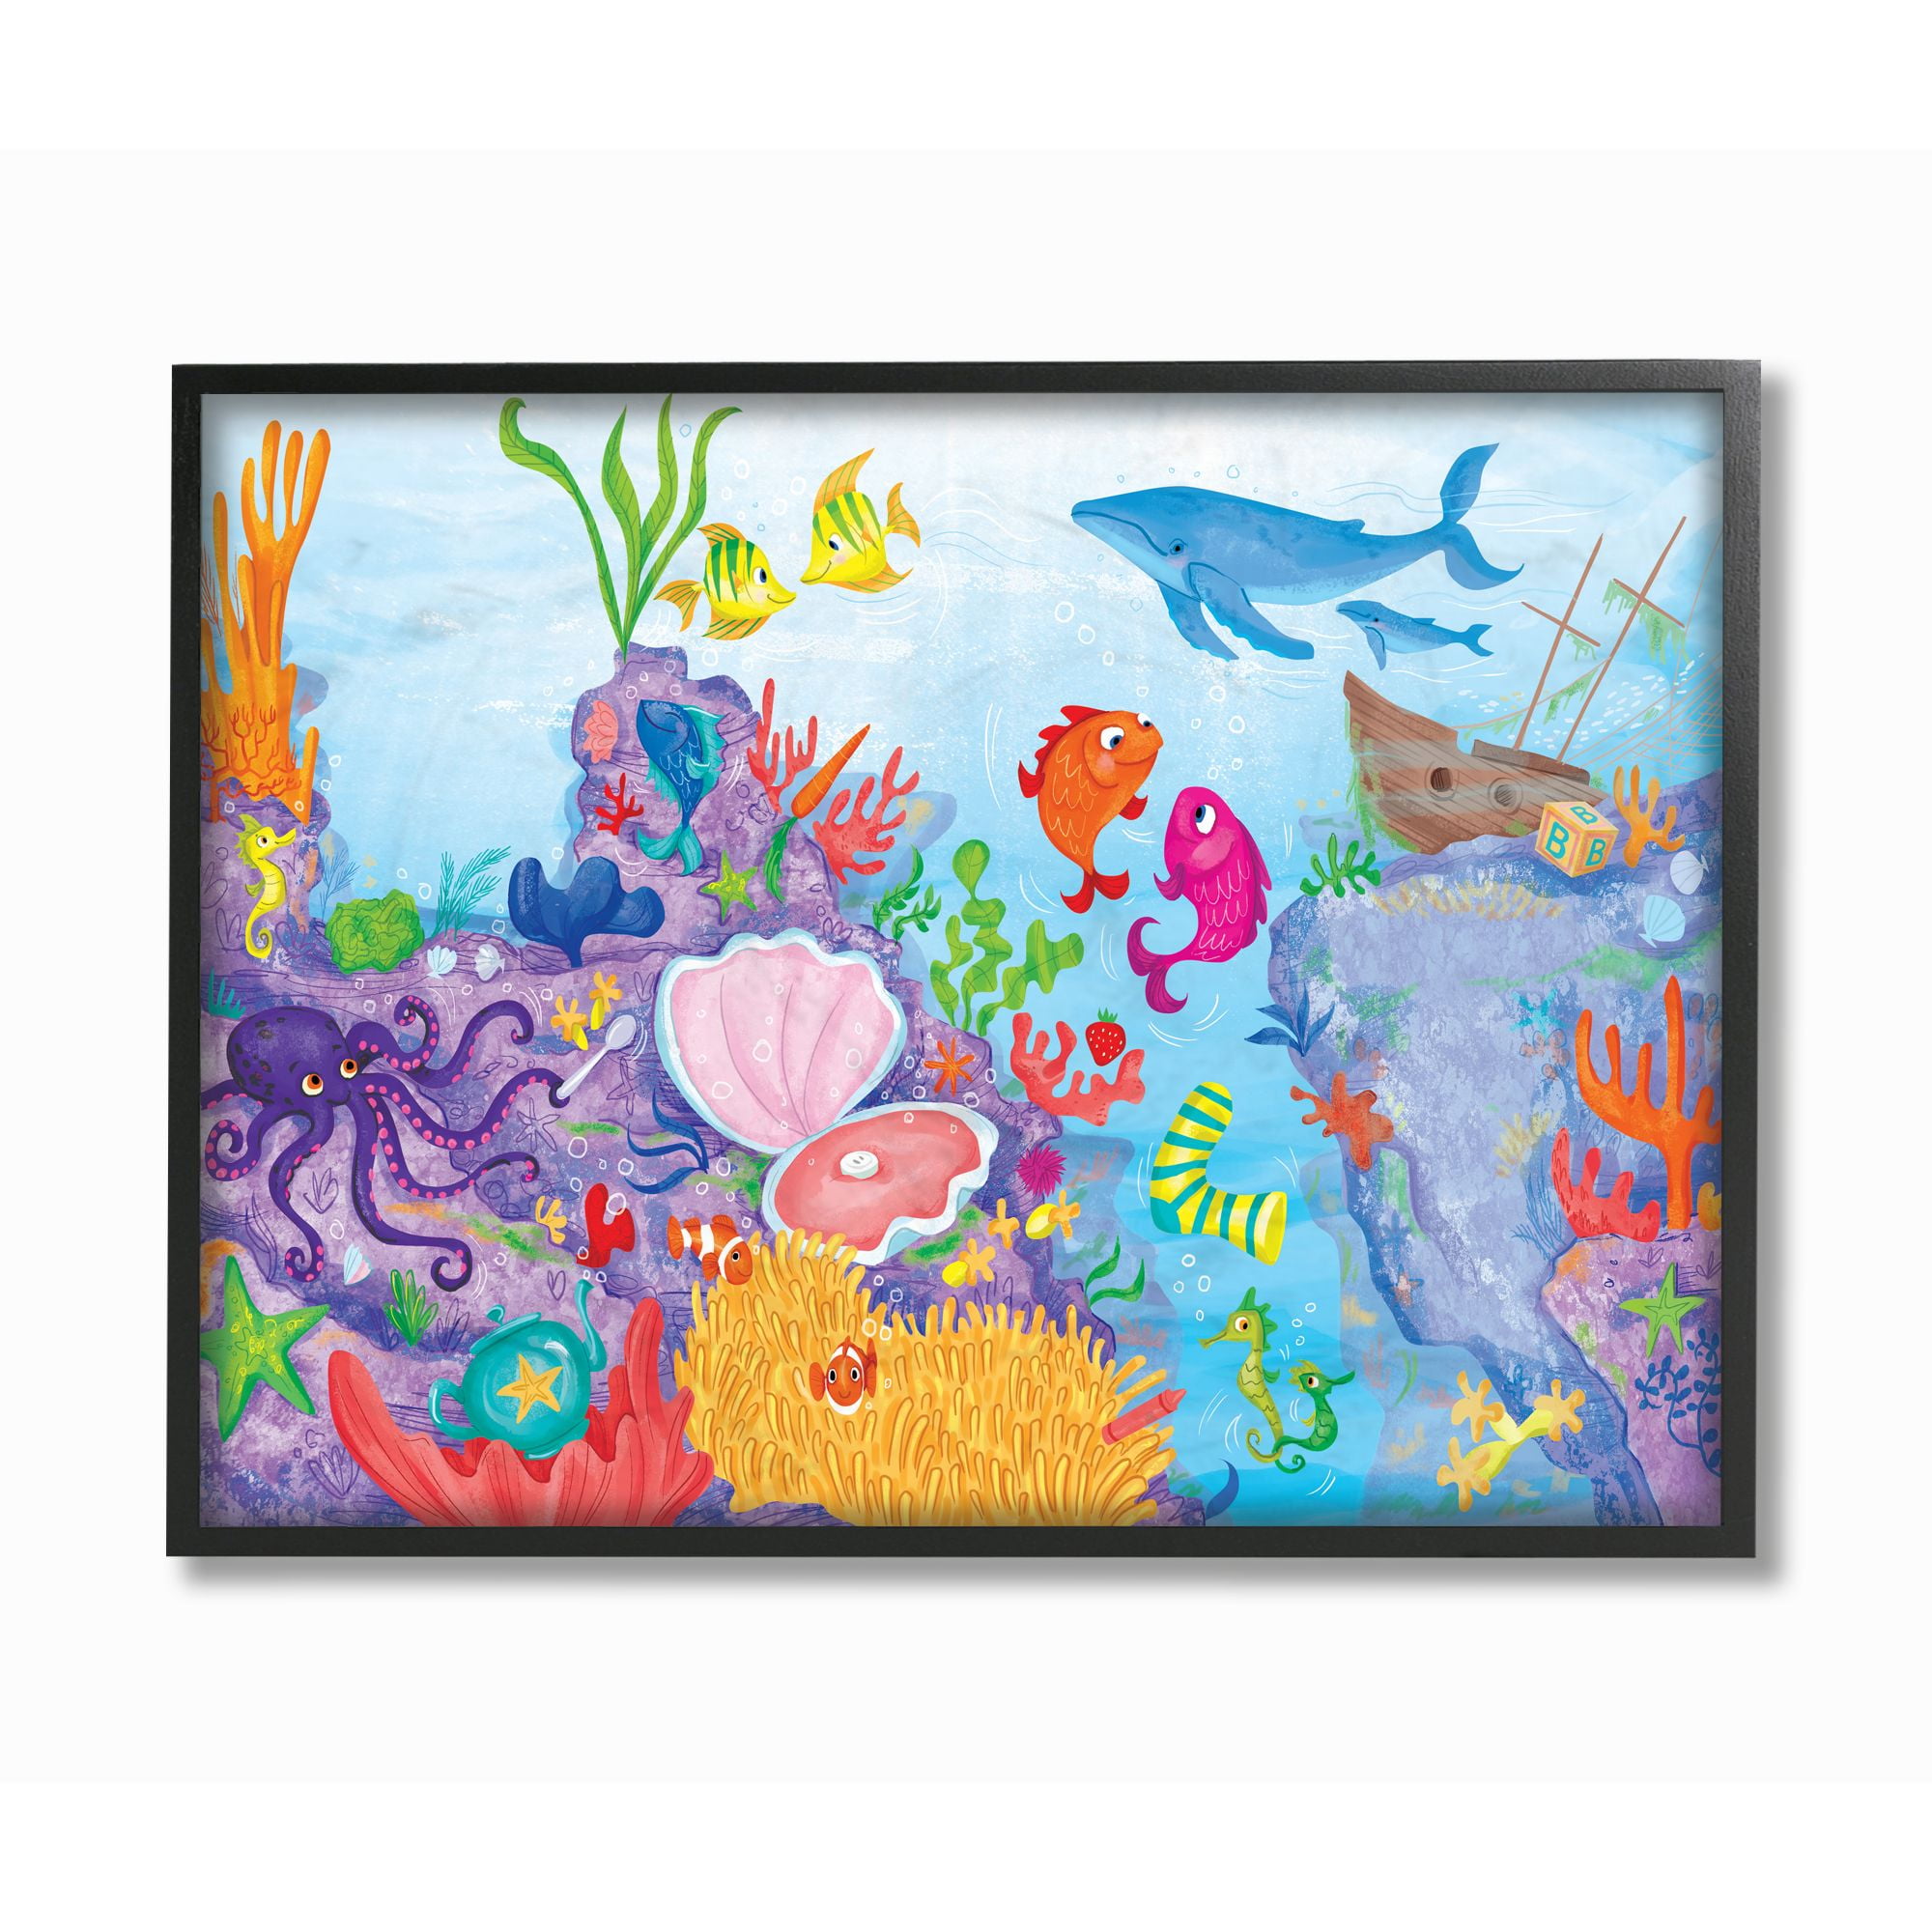 The Kids Room by Stupell Colorful Ocean Sea Life Fish Blue Purple Kids Nursery Painting Canvas Wall Art by The Saturday Evening Post, Size: 36 x 48